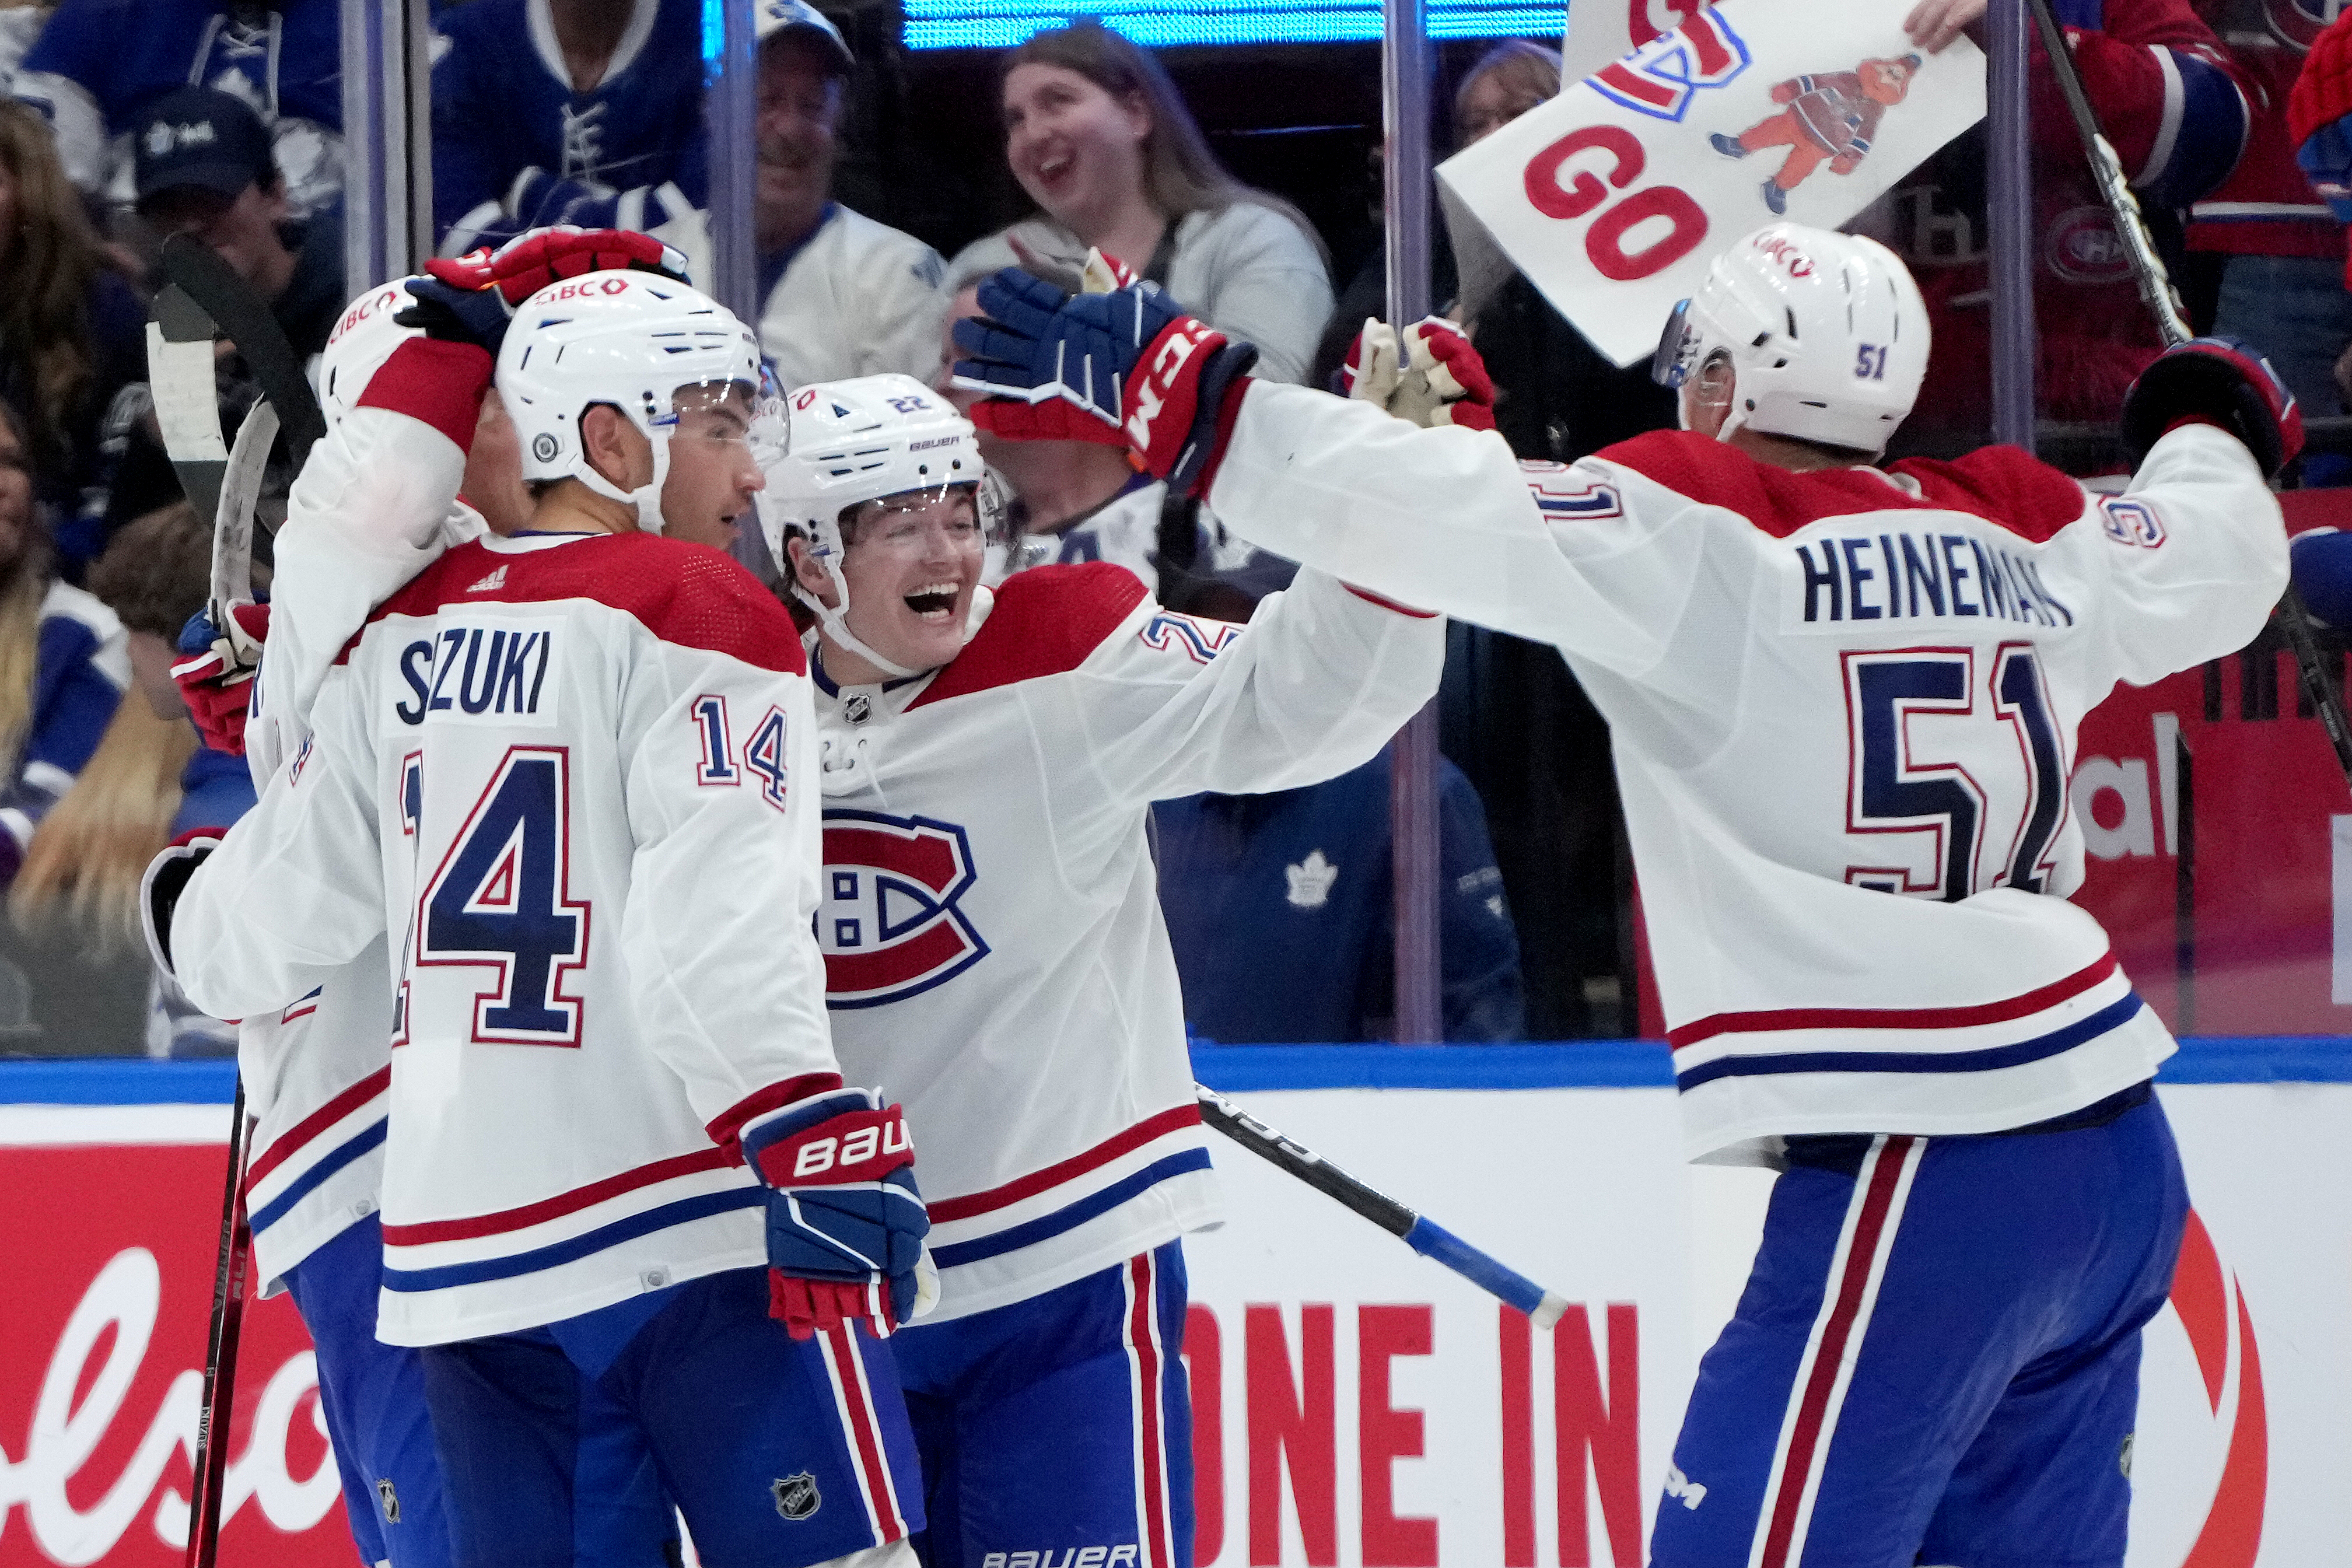 Brian Wilde on Montreal Canadiens: This year’s team should be ‘considerably better’